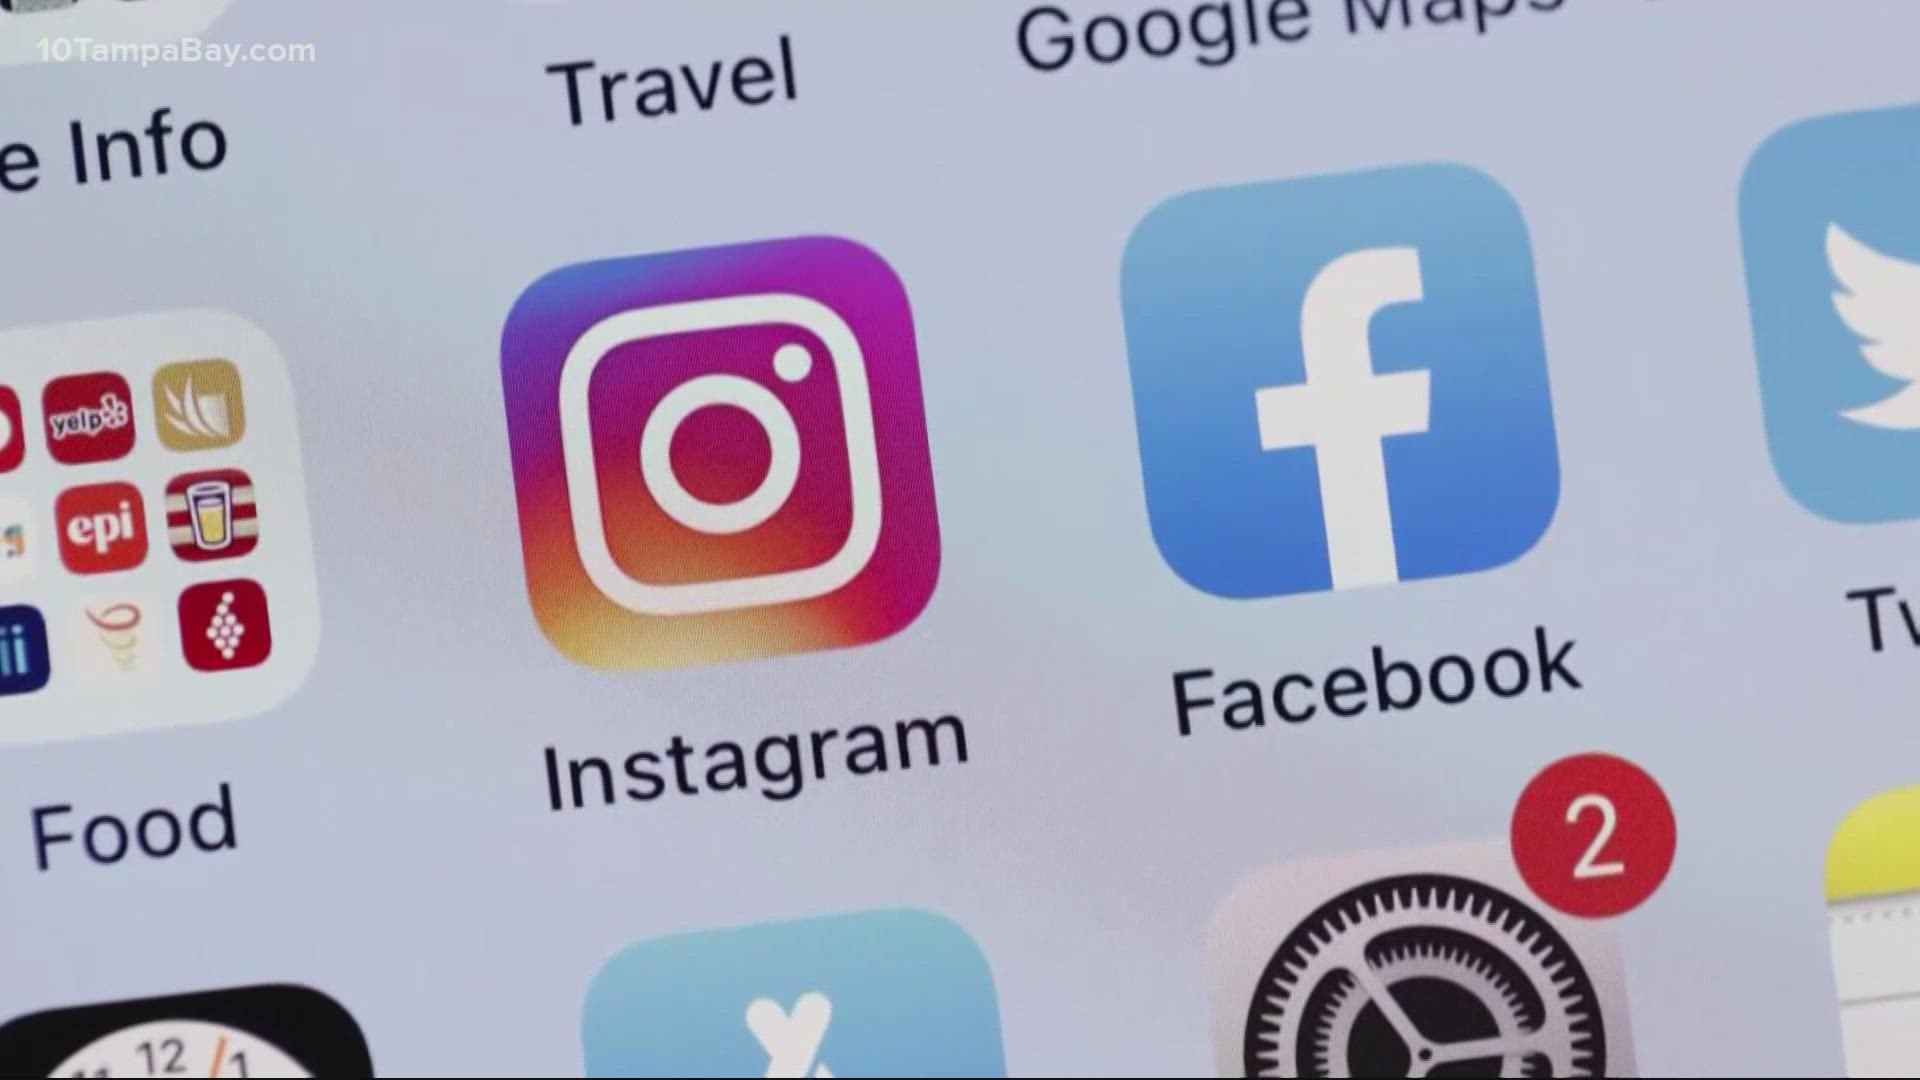 Instagram revealed details about its first tools for parents on the same day it rolled out the previously announced “Take A Break" feature for teens.